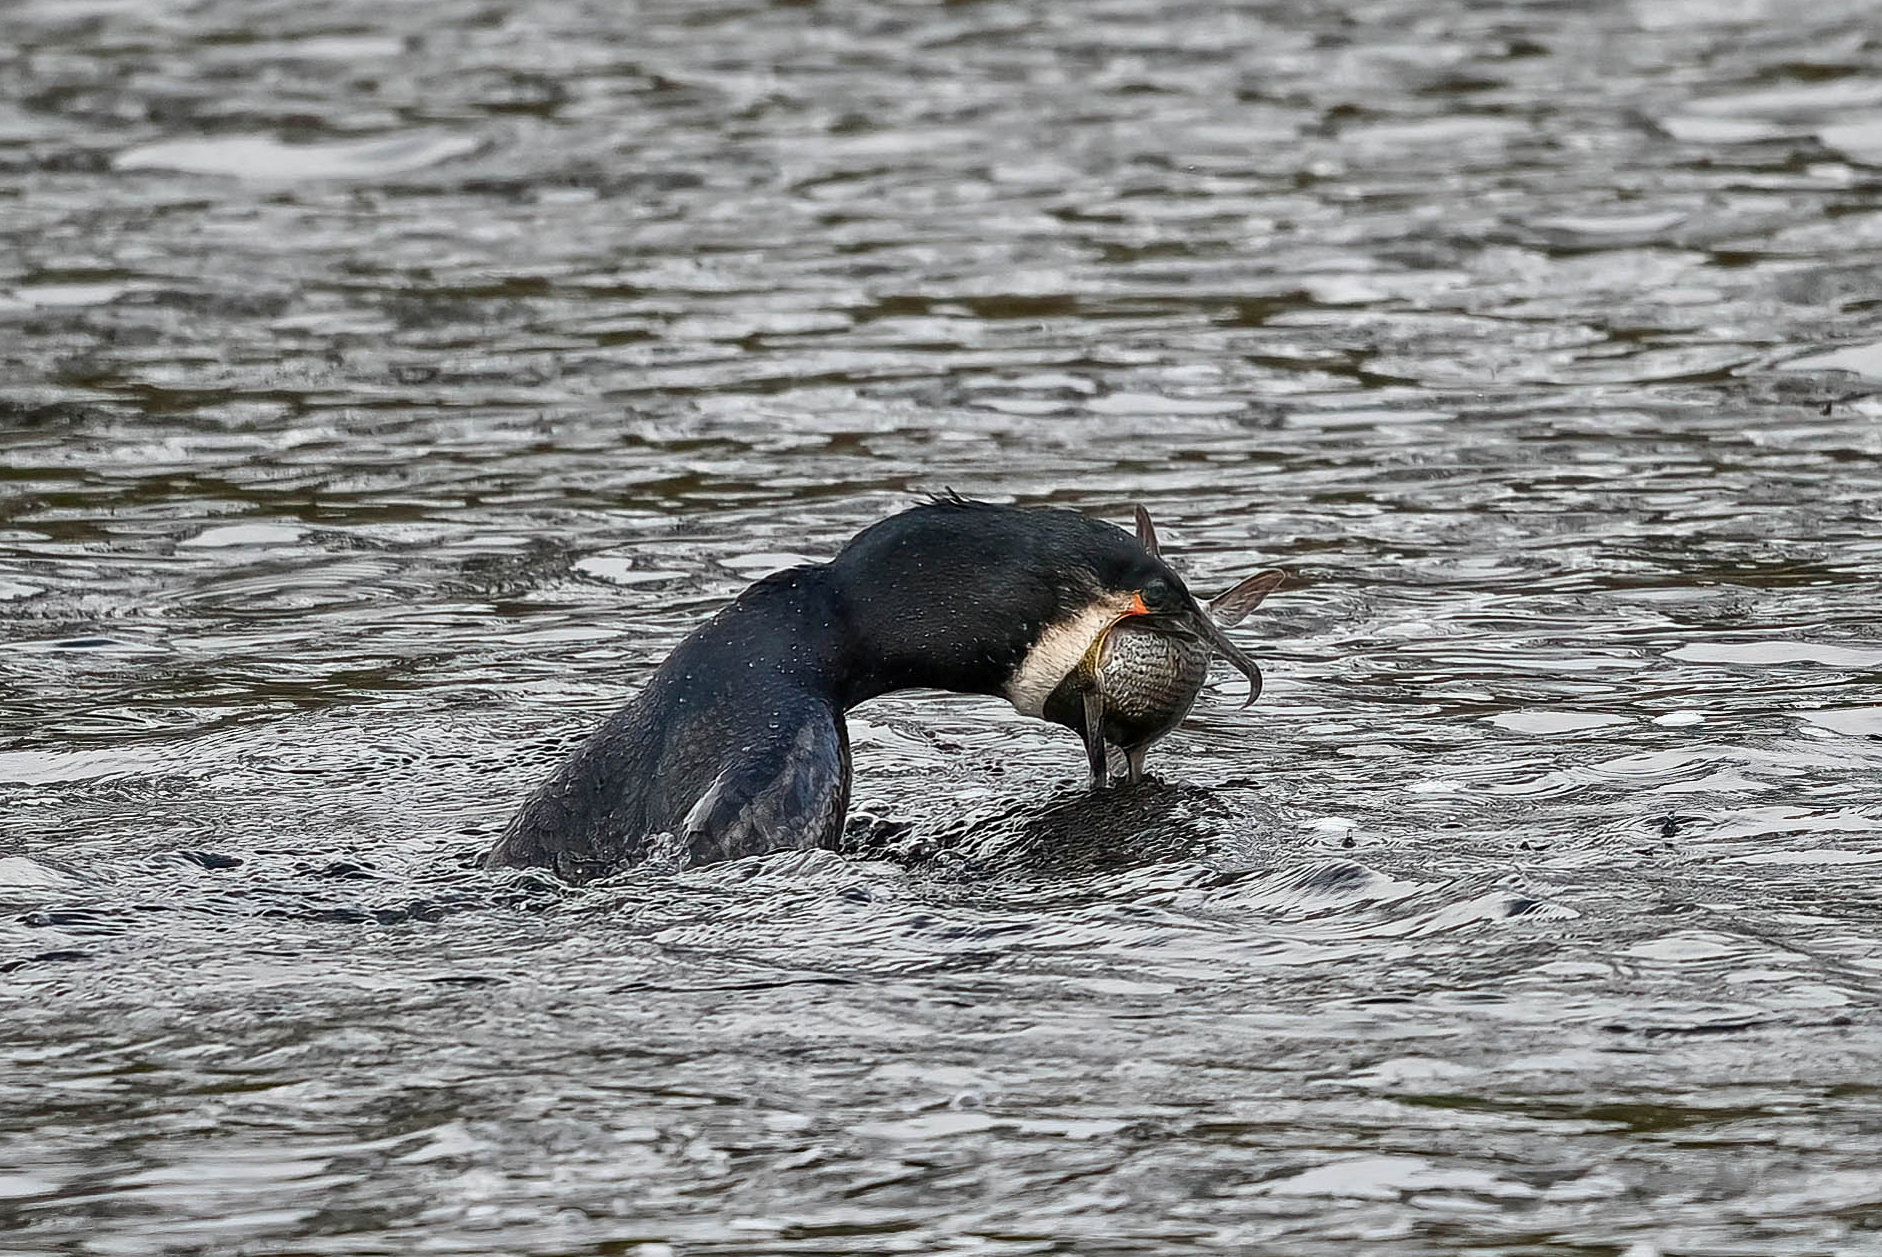 These amazing pictures show the moment a cormorant wrestled with a huge fish.